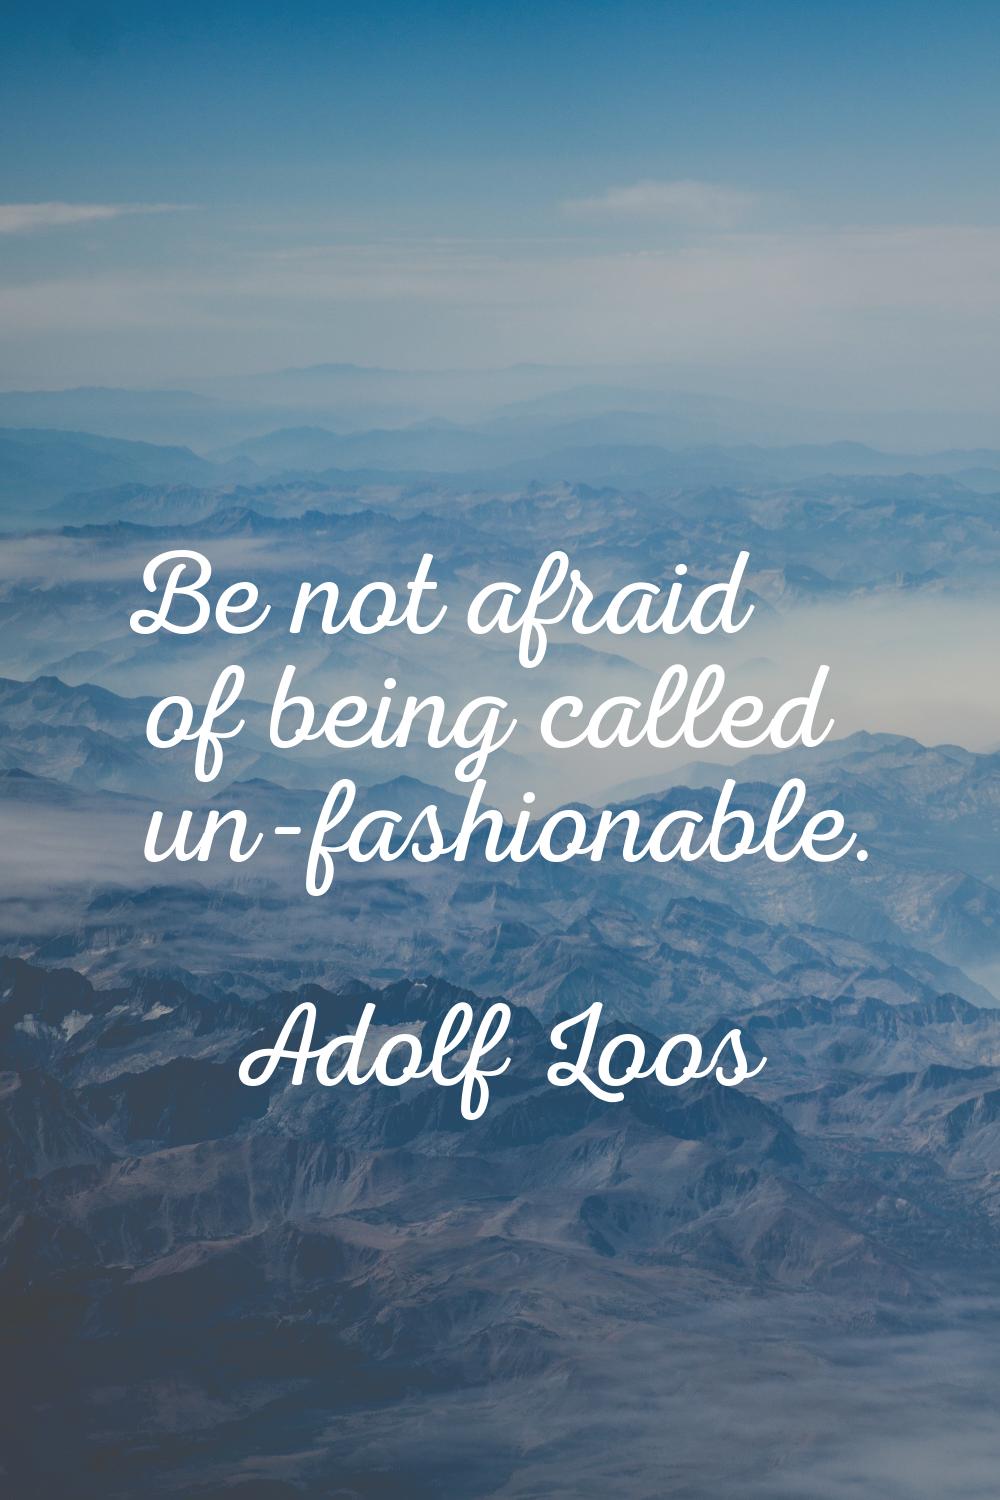 Be not afraid of being called un-fashionable.